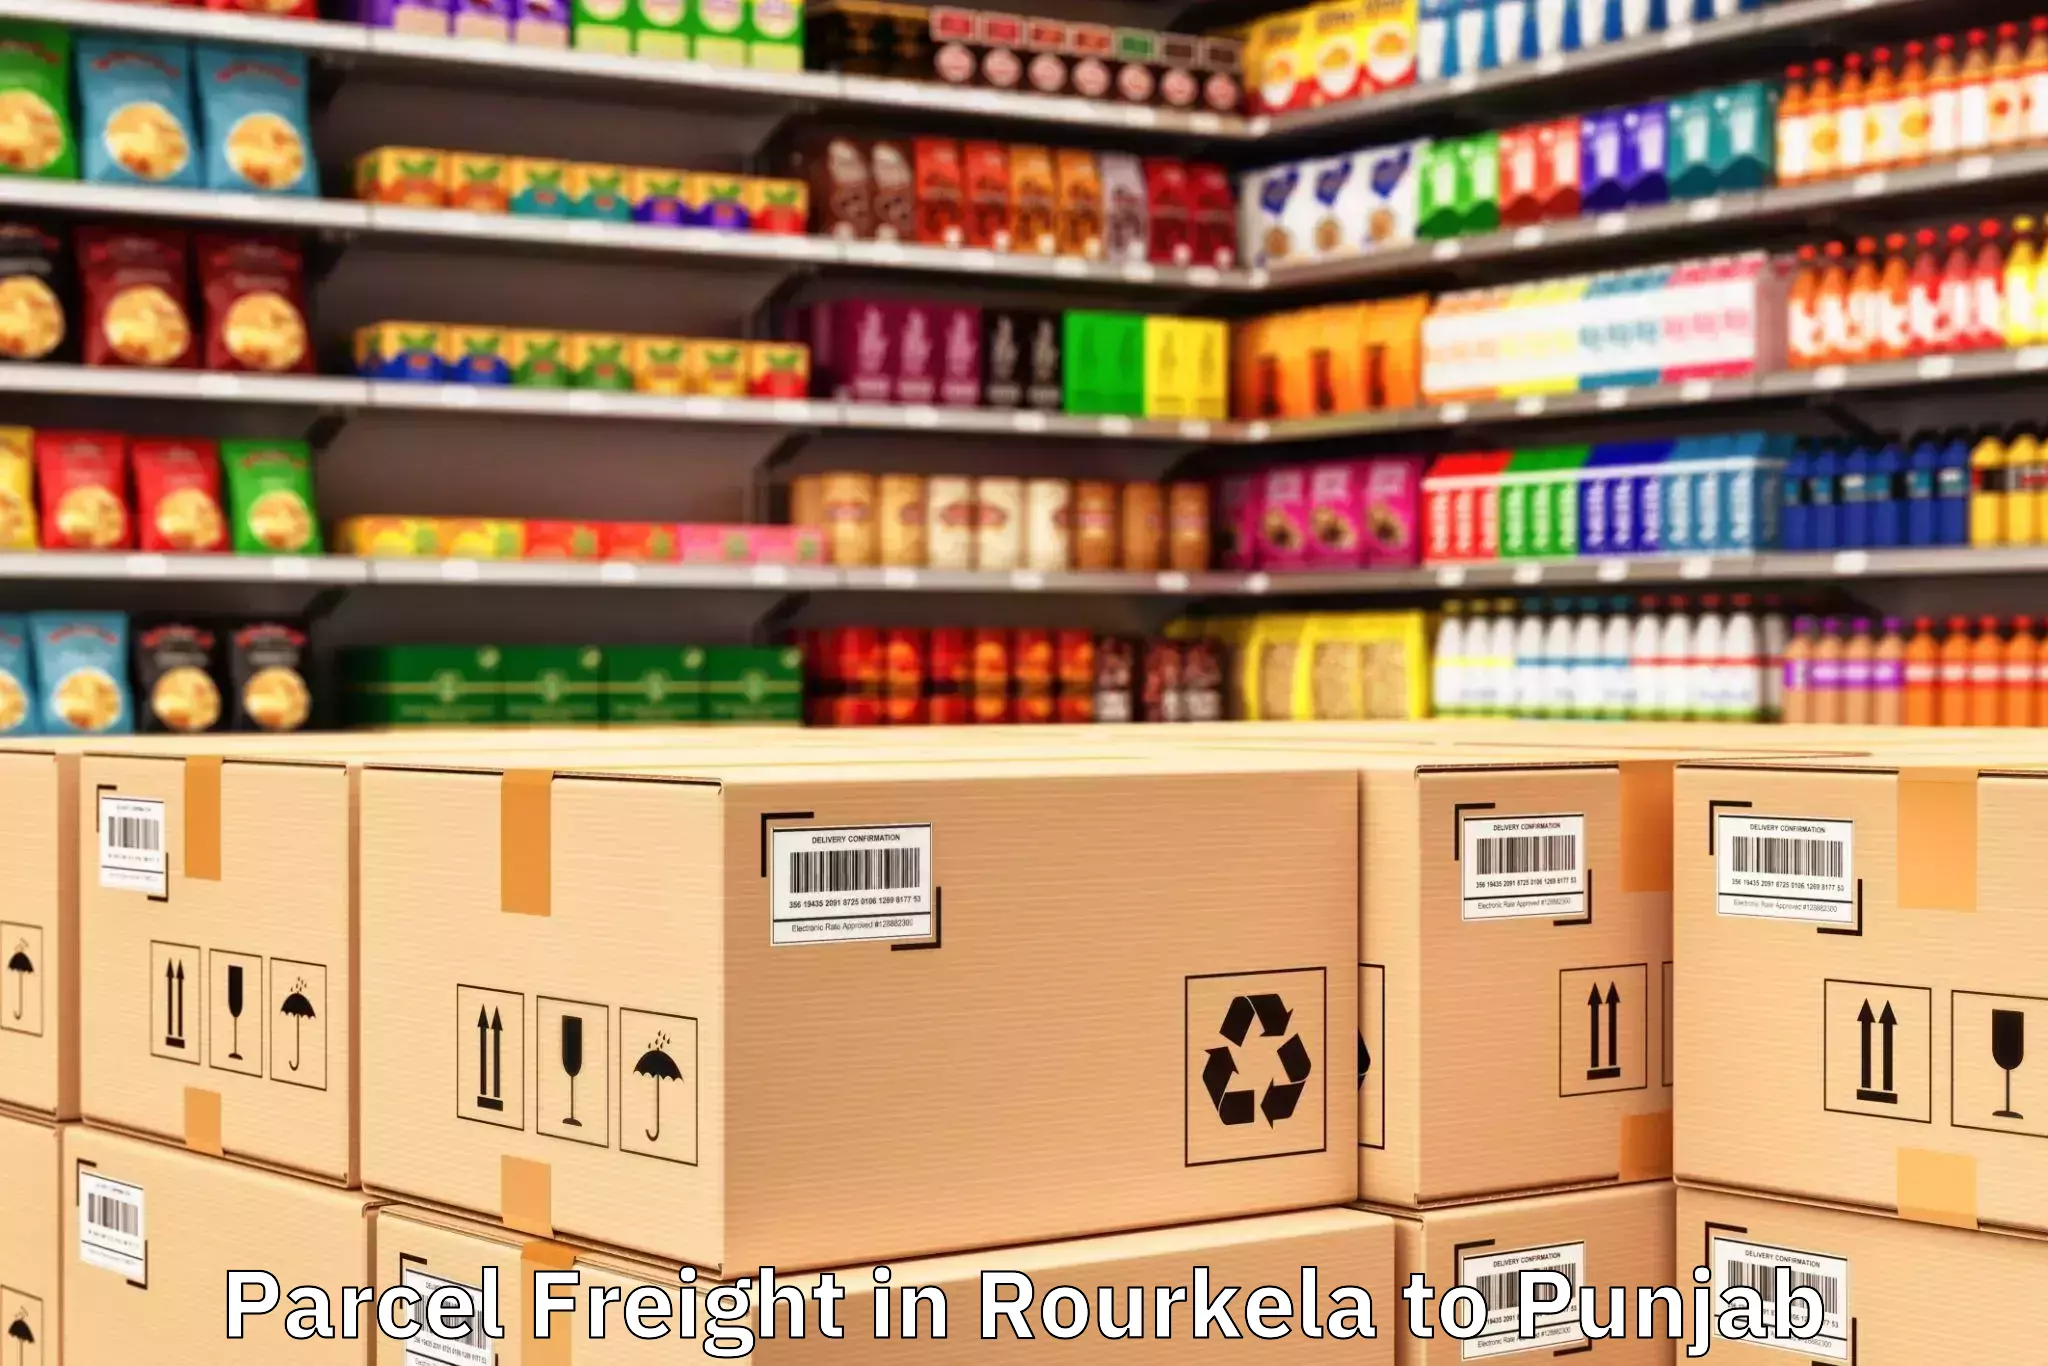 Quality Rourkela to Amritsar Parcel Freight